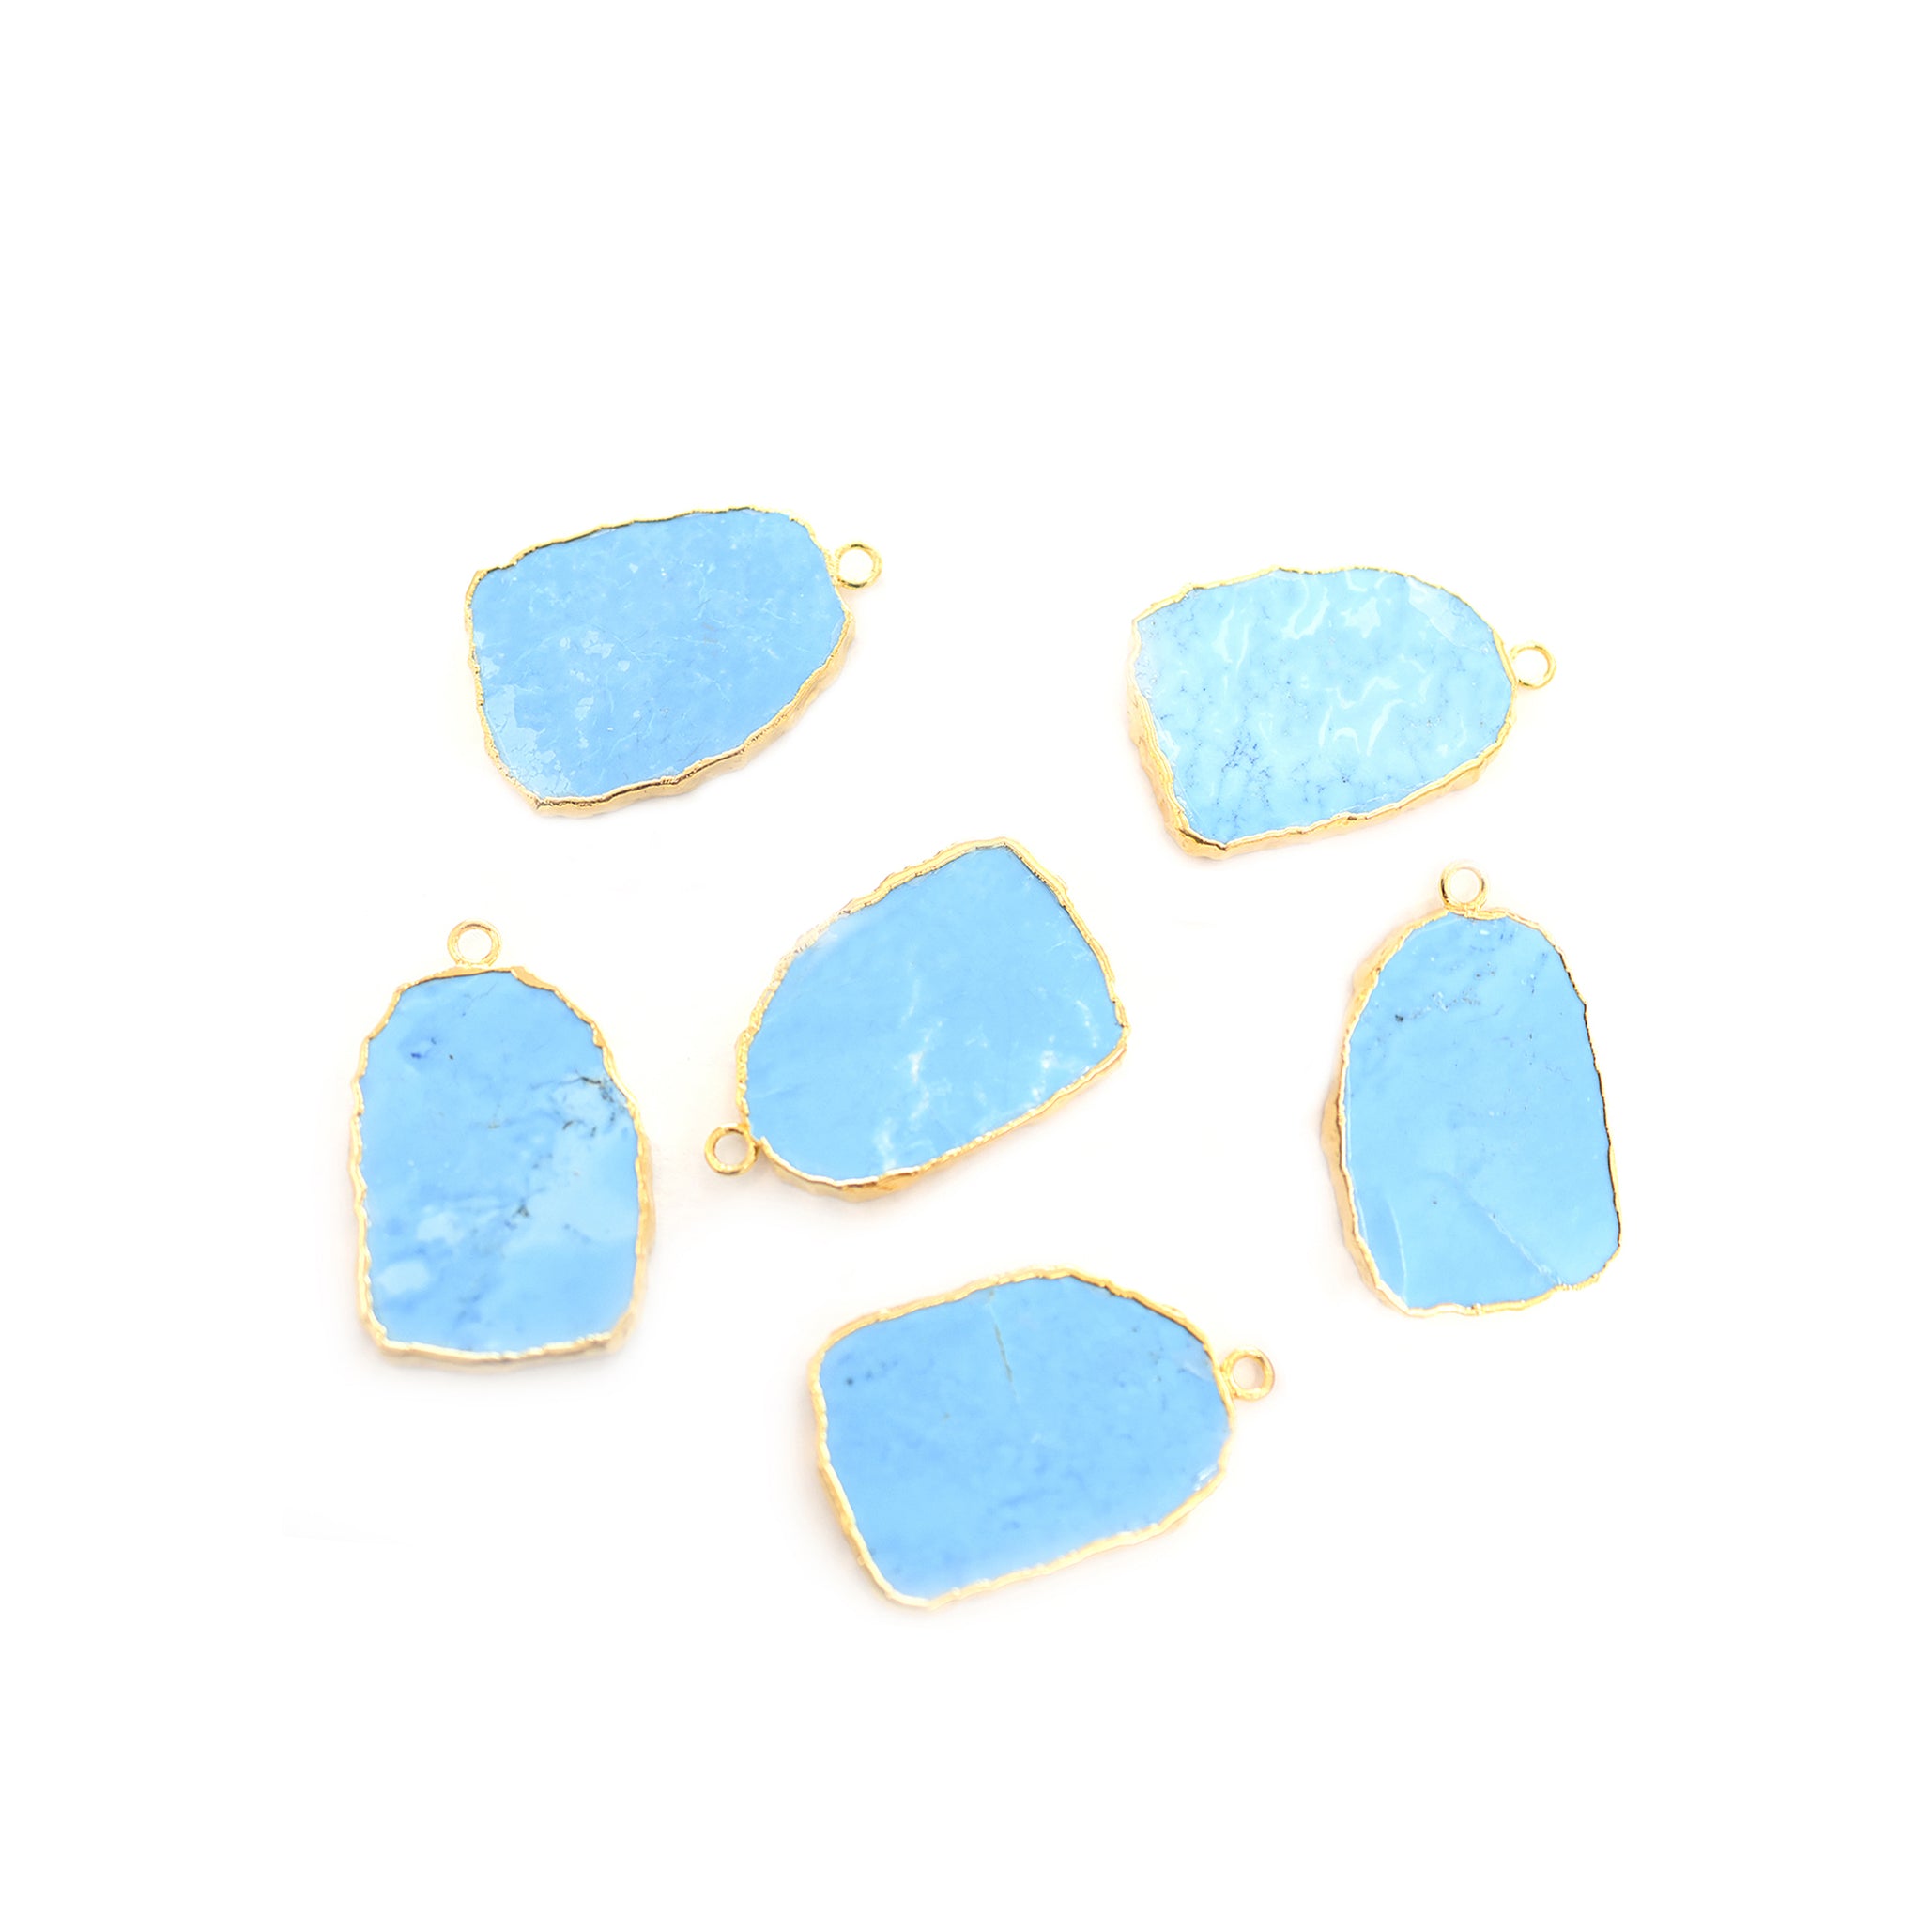 Howlite 31X22 MM Uneven Shape Gold Electroplated Pendant